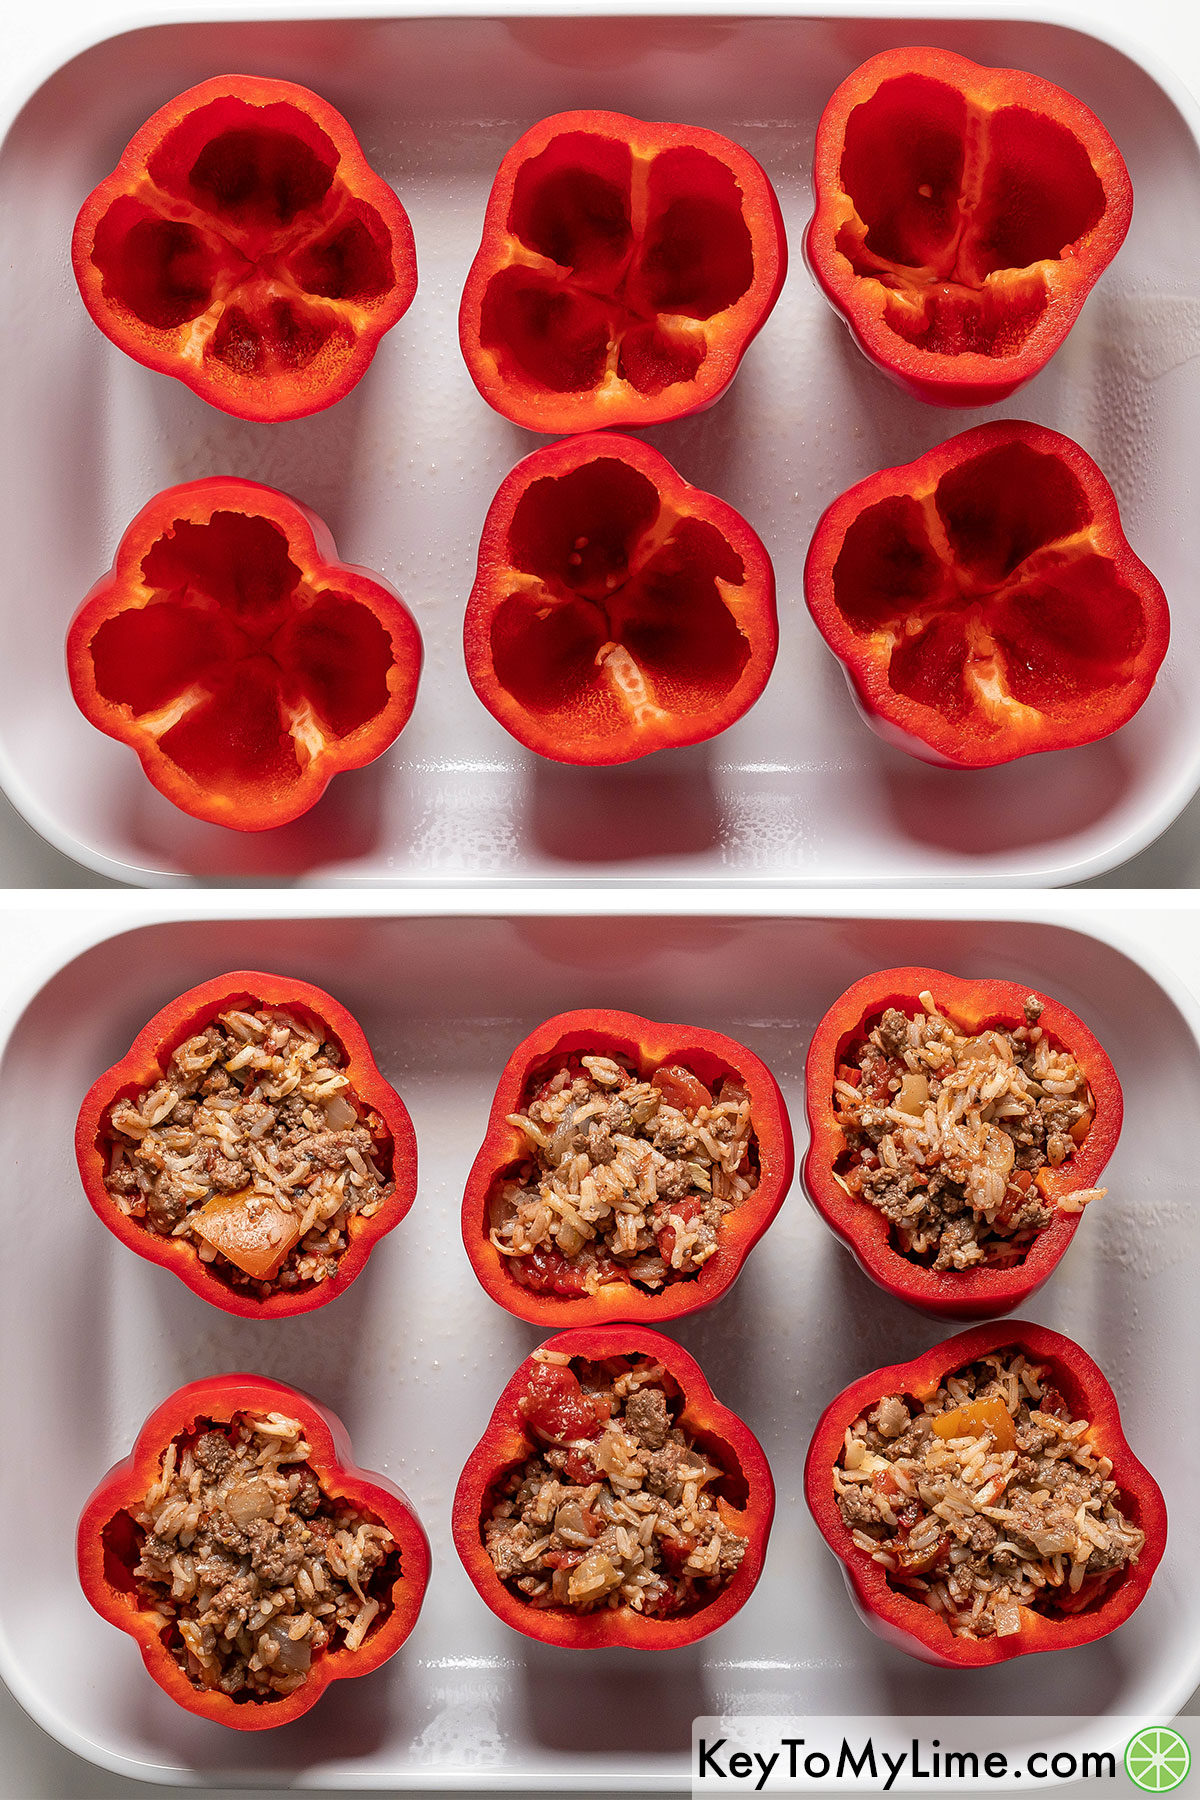 Filling red pell peppers with a ground beef and rice mixture.